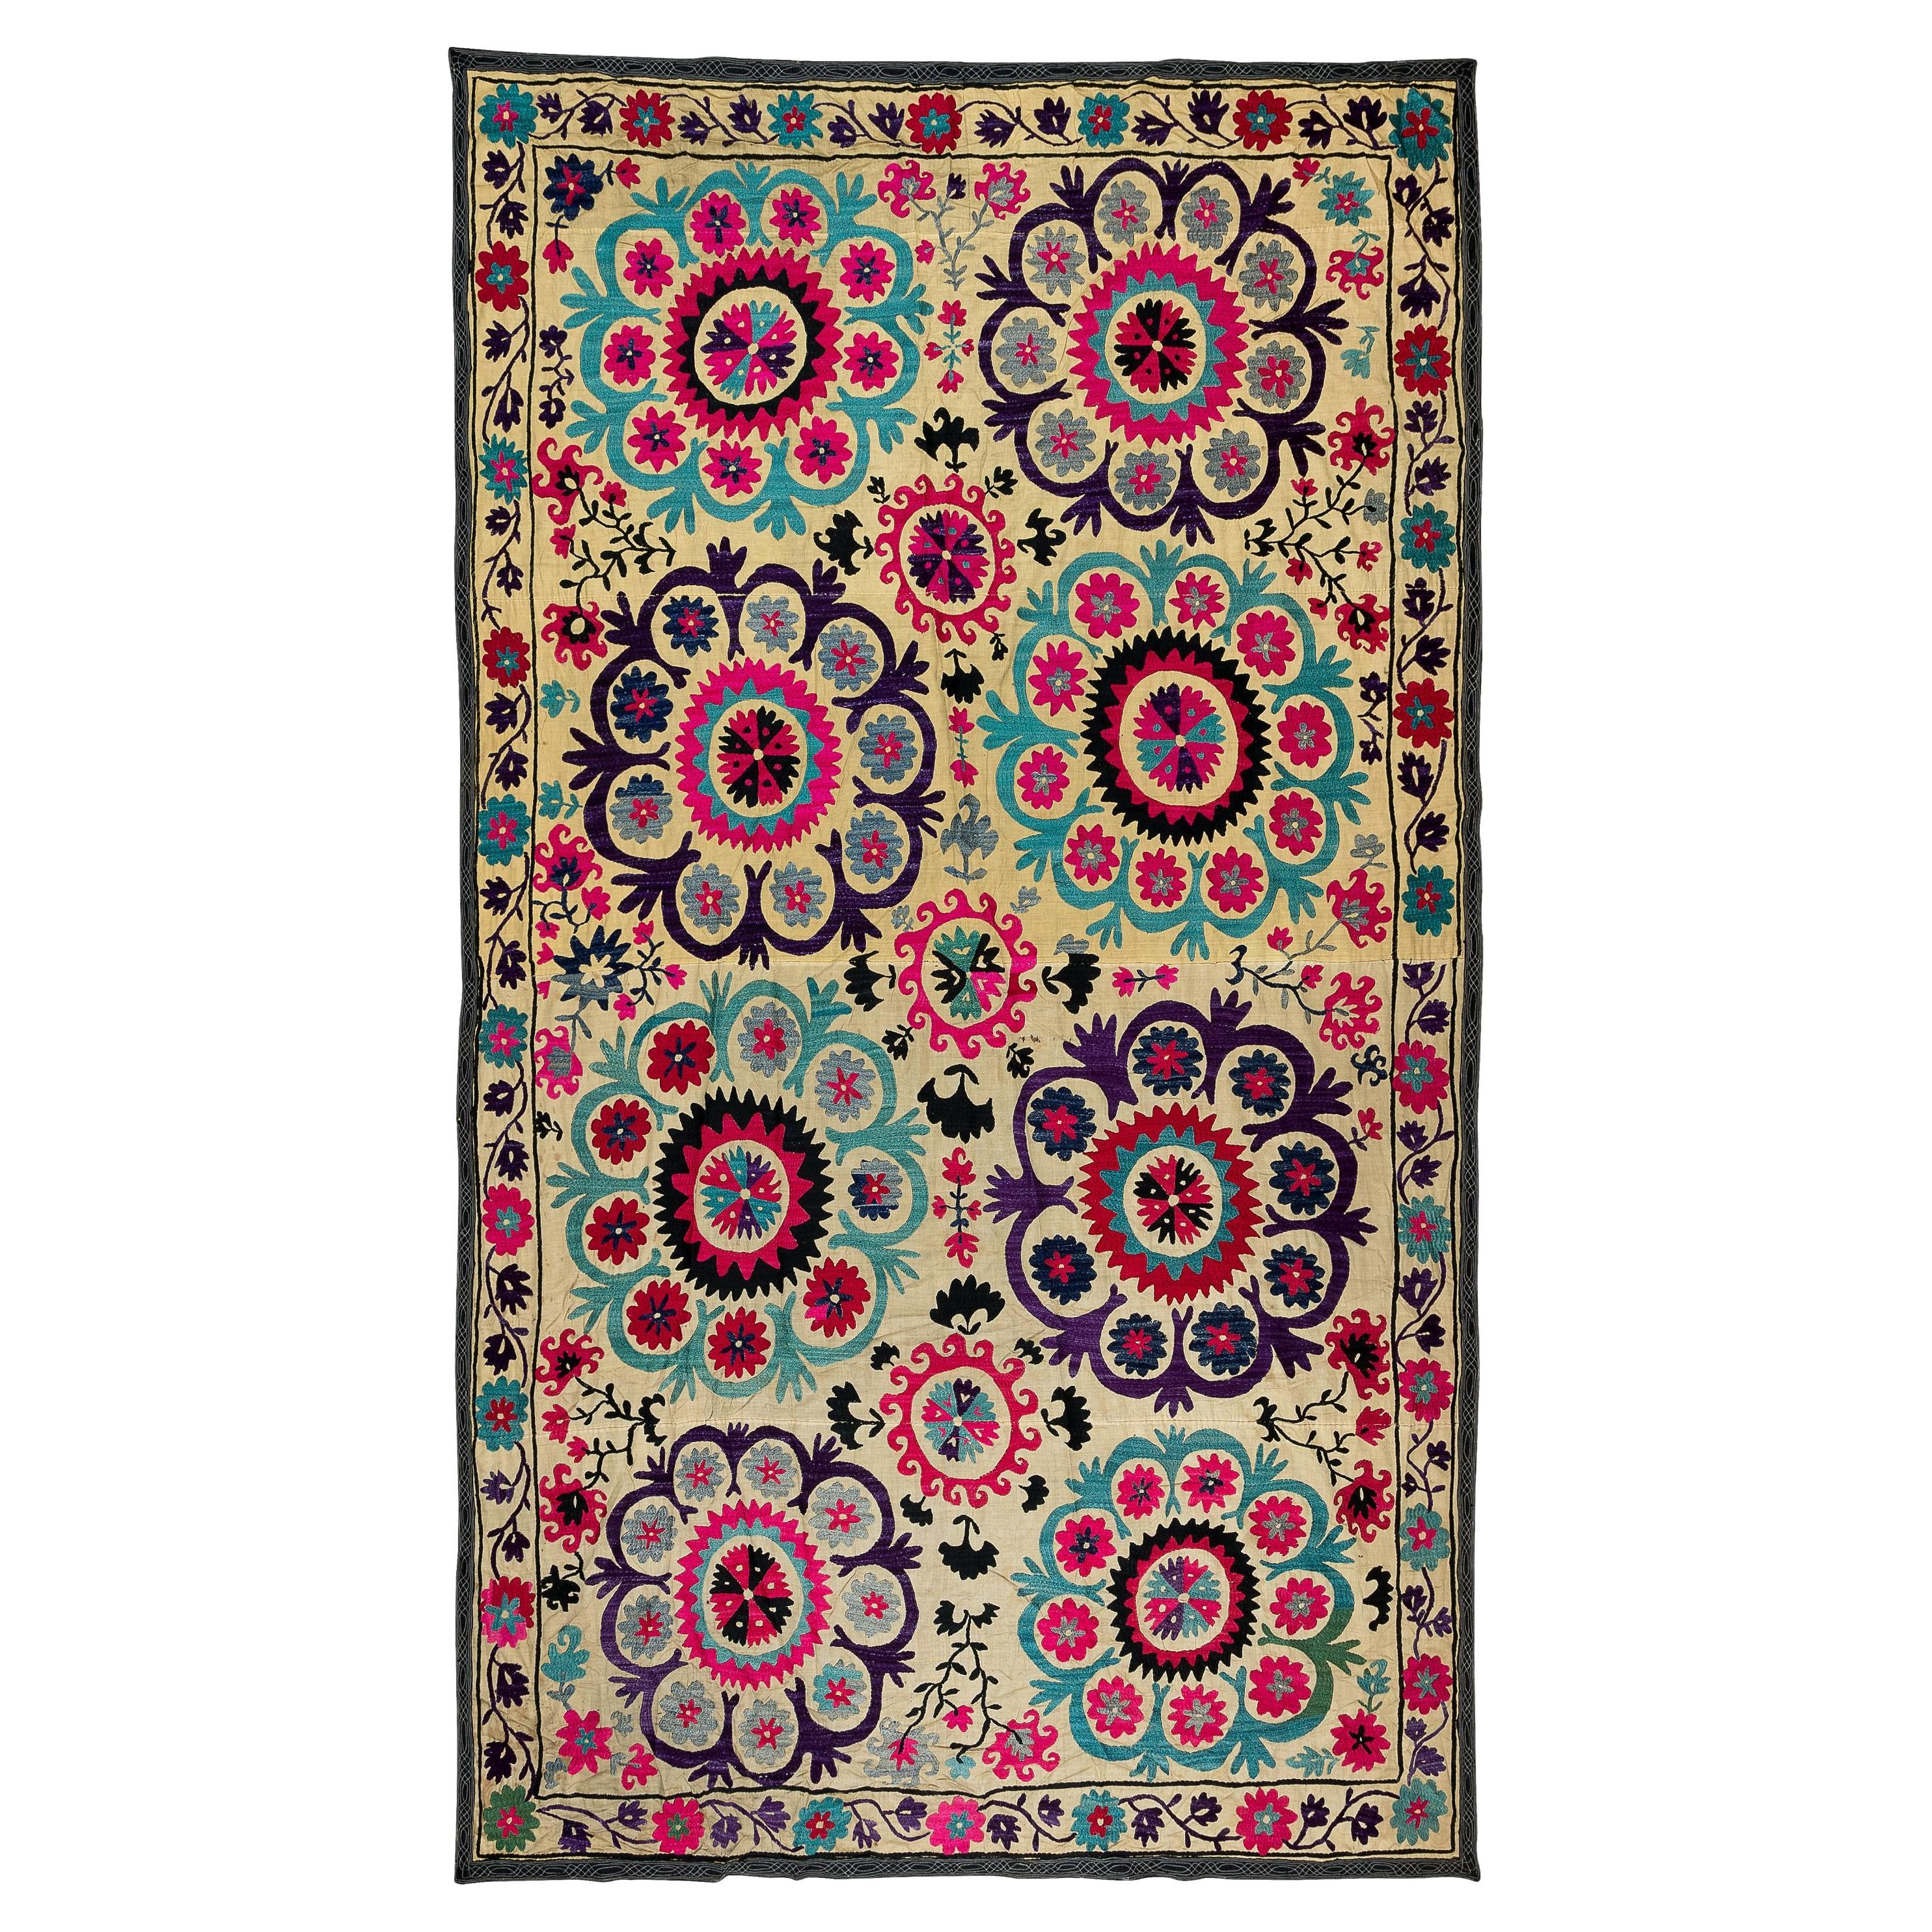 6x9.6 Ft Silk Embroidery Throw, Floral 1970s Suzani Tapestry, Uzbek Wall Hanging For Sale